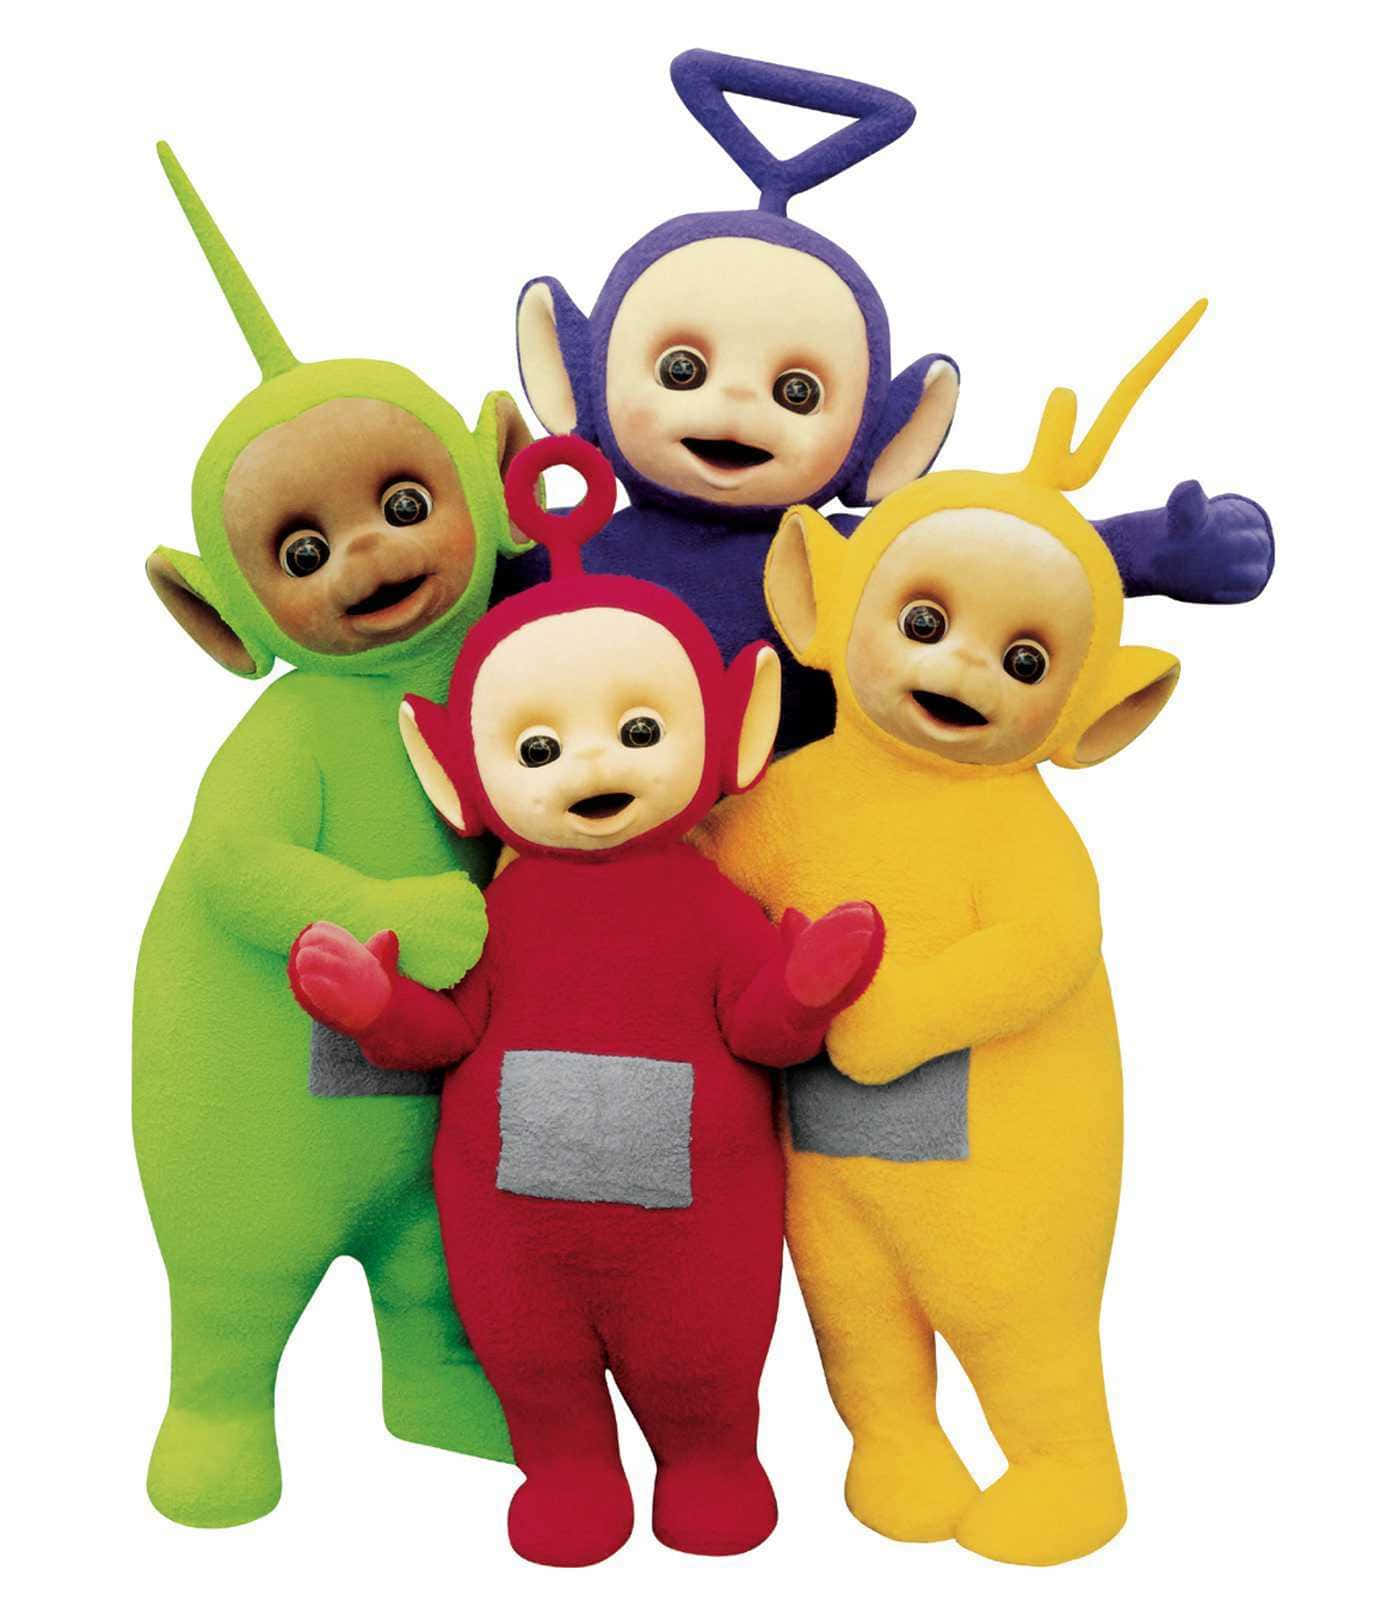 Download Teletubbies - A Group Of Colorful Characters | Wallpapers.com